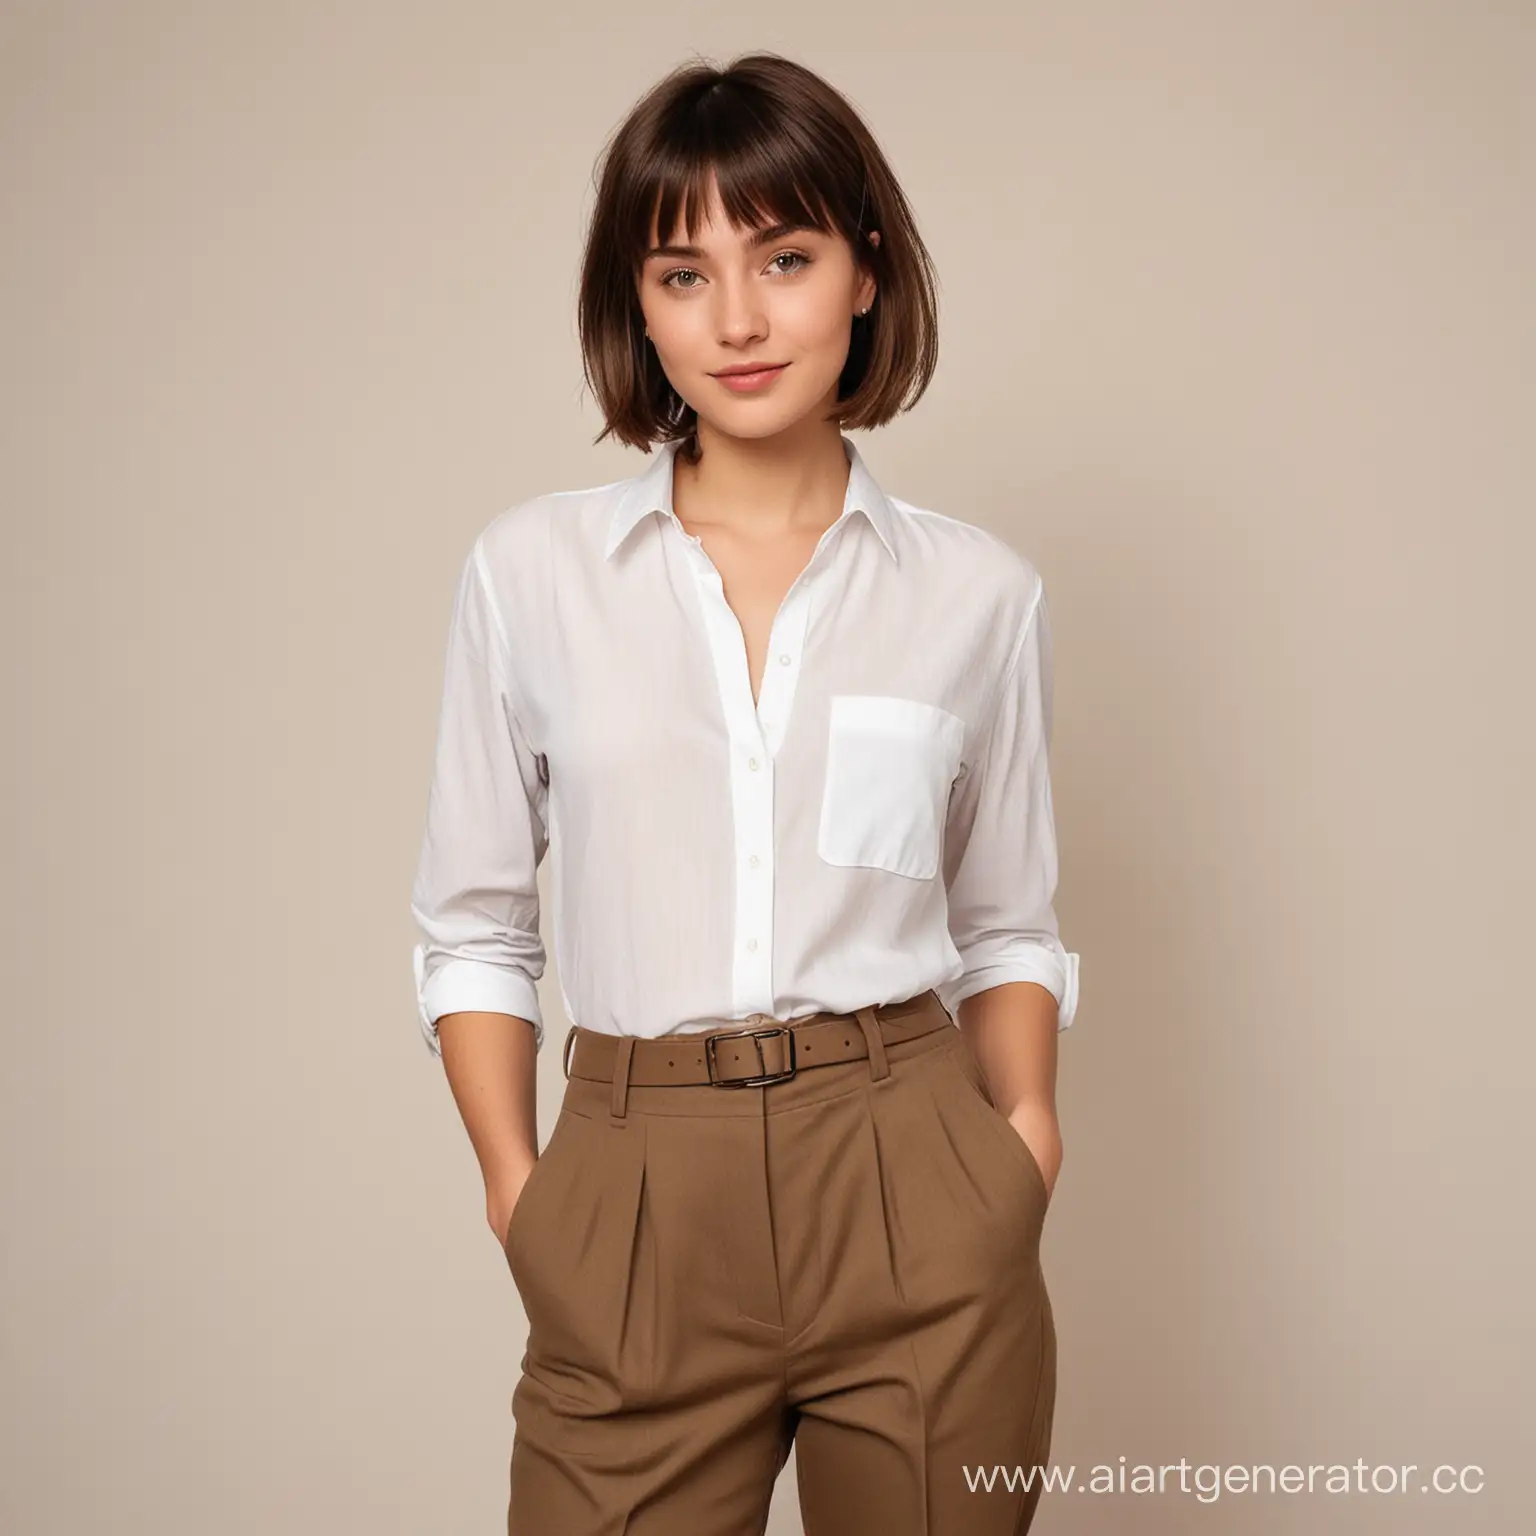 Stylish-Girl-in-White-Shirt-and-Brown-Trousers-Poses-Confidently